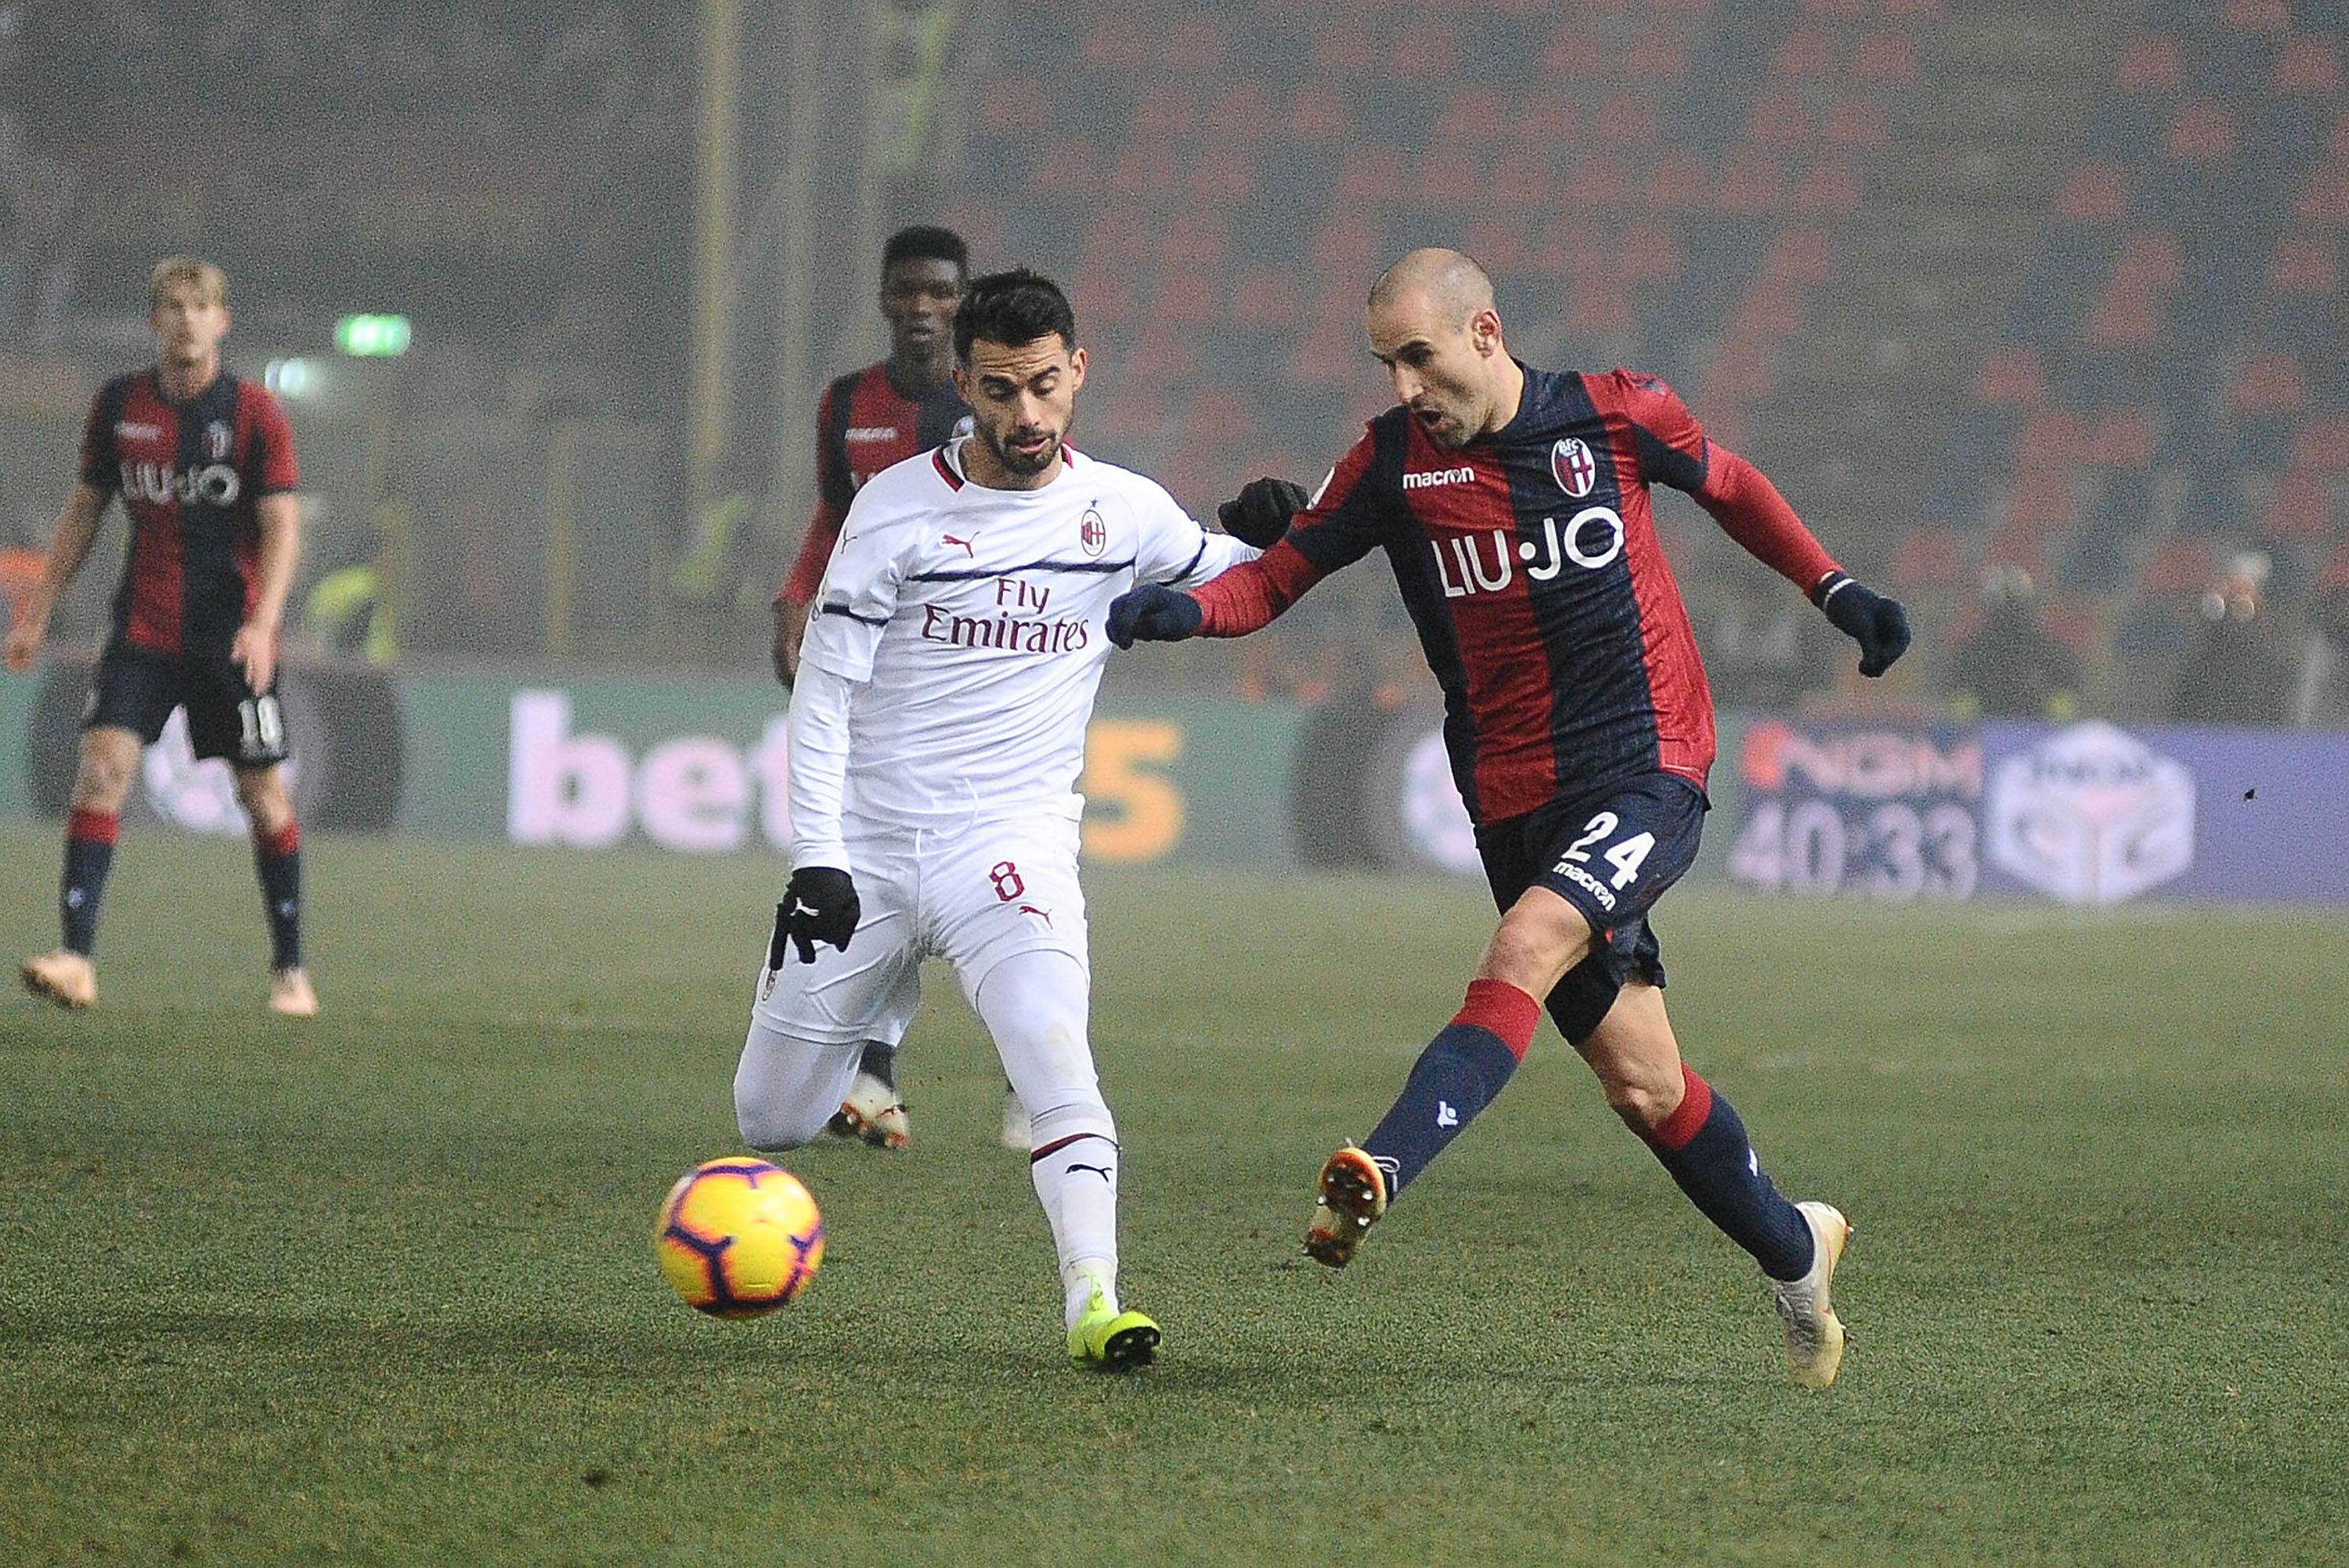 BOLOGNA, ITALY - DECEMBER 18: Rodrigo Palacio of Bologna FC in action during the Serie A match between Bologna FC and AC Milan at Stadio Renato Dall'Ara on December 18, 2018 in Bologna, Italy. (Photo by Mario Carlini / Iguana Press/Getty Images)